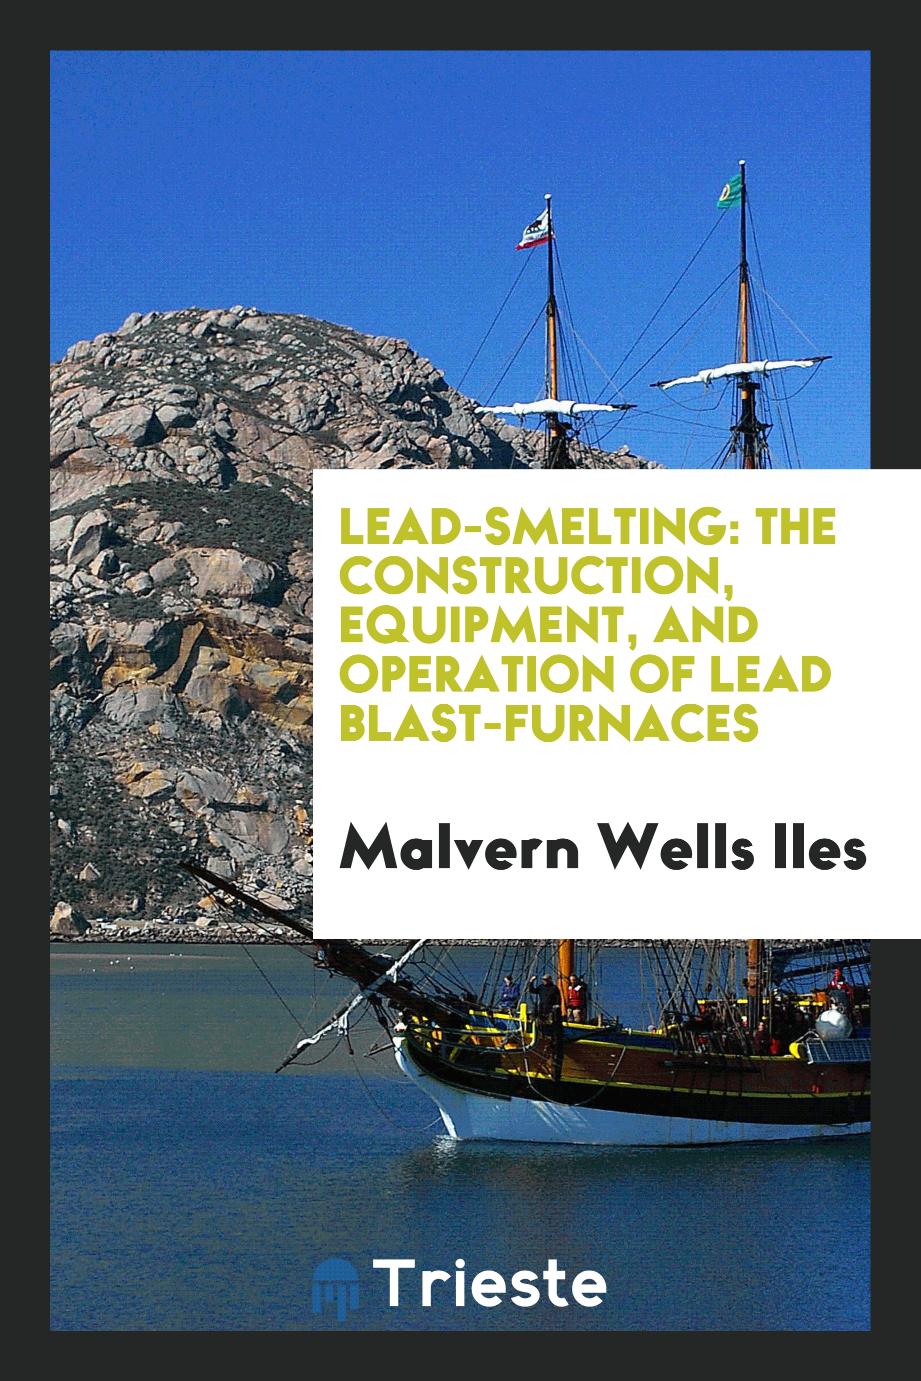 Lead-Smelting: The Construction, Equipment, and Operation of Lead Blast-Furnaces